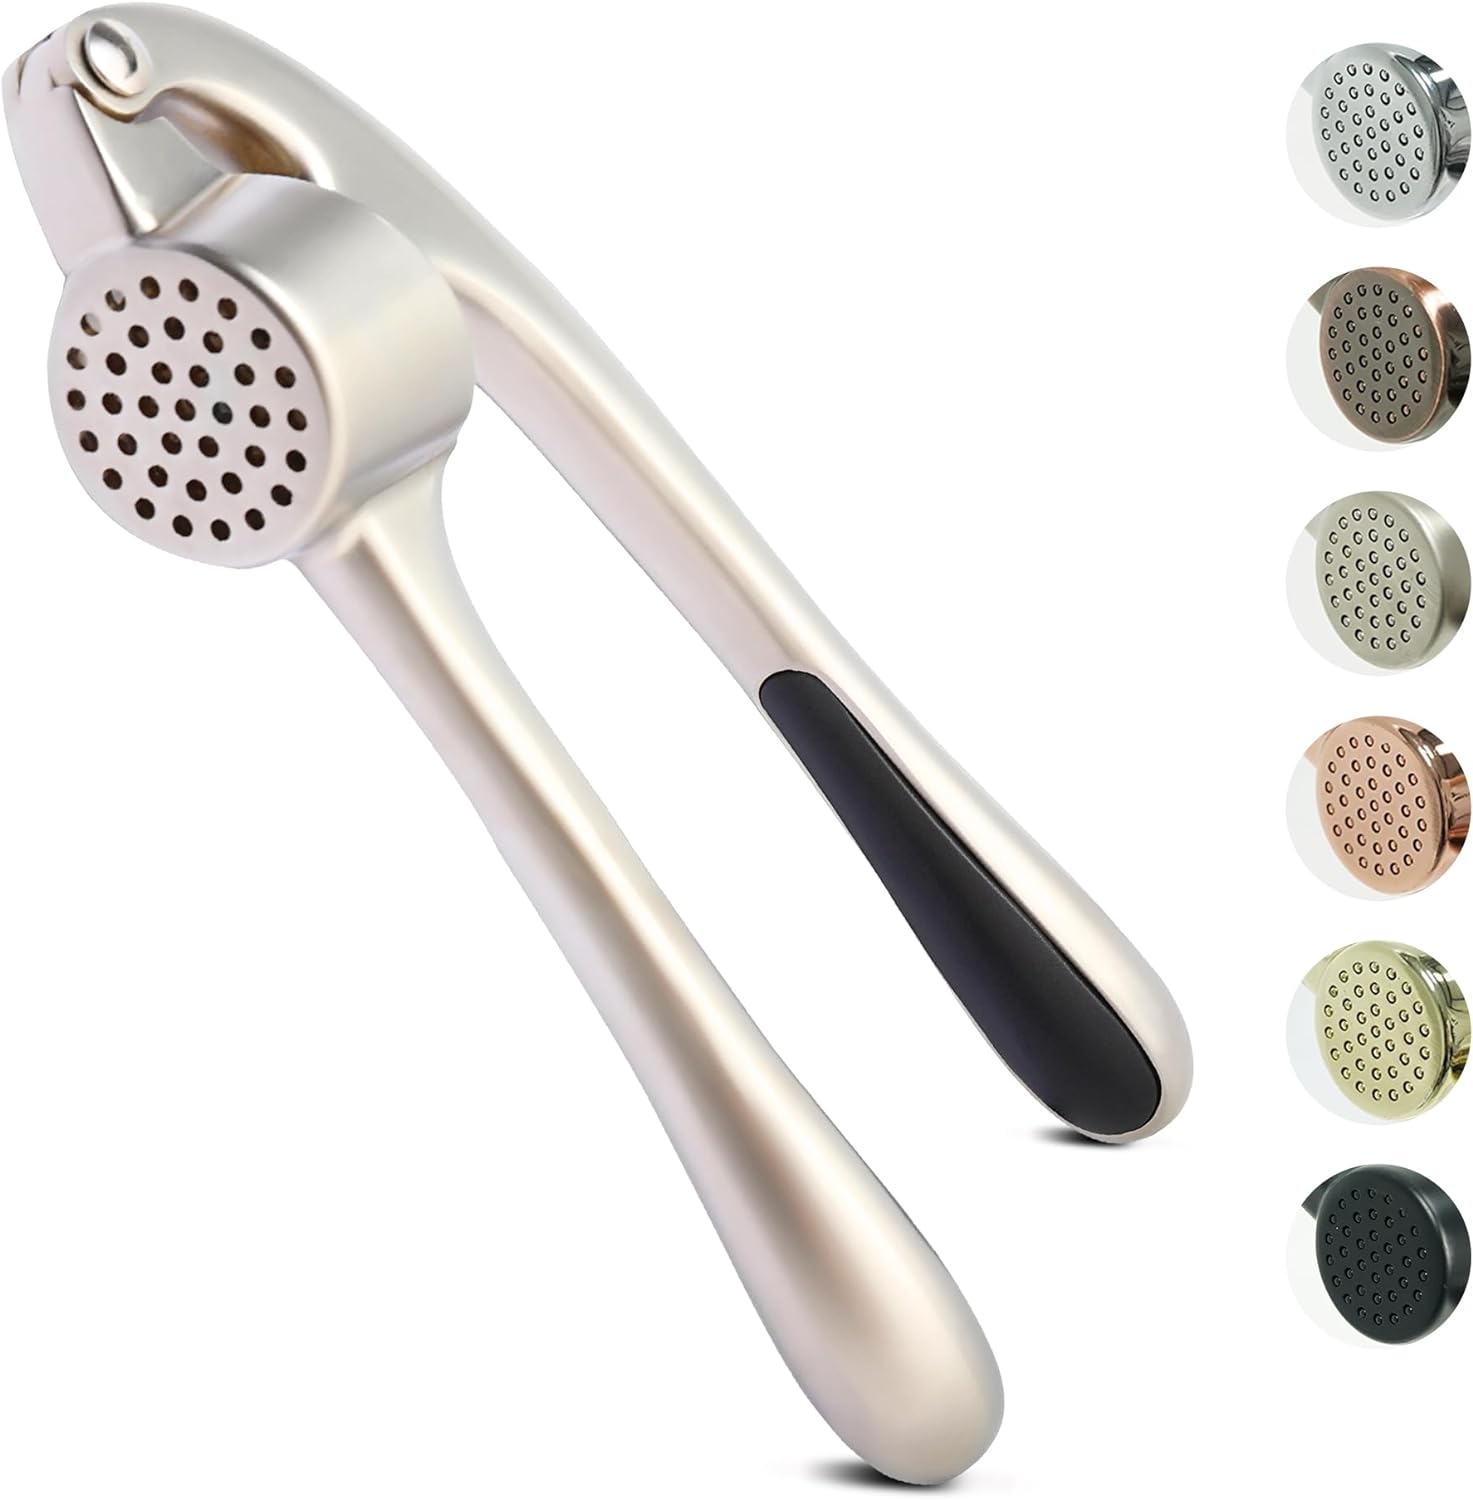 Pampered Chef Garlic Press #2575 With Cleaning Tool And Box